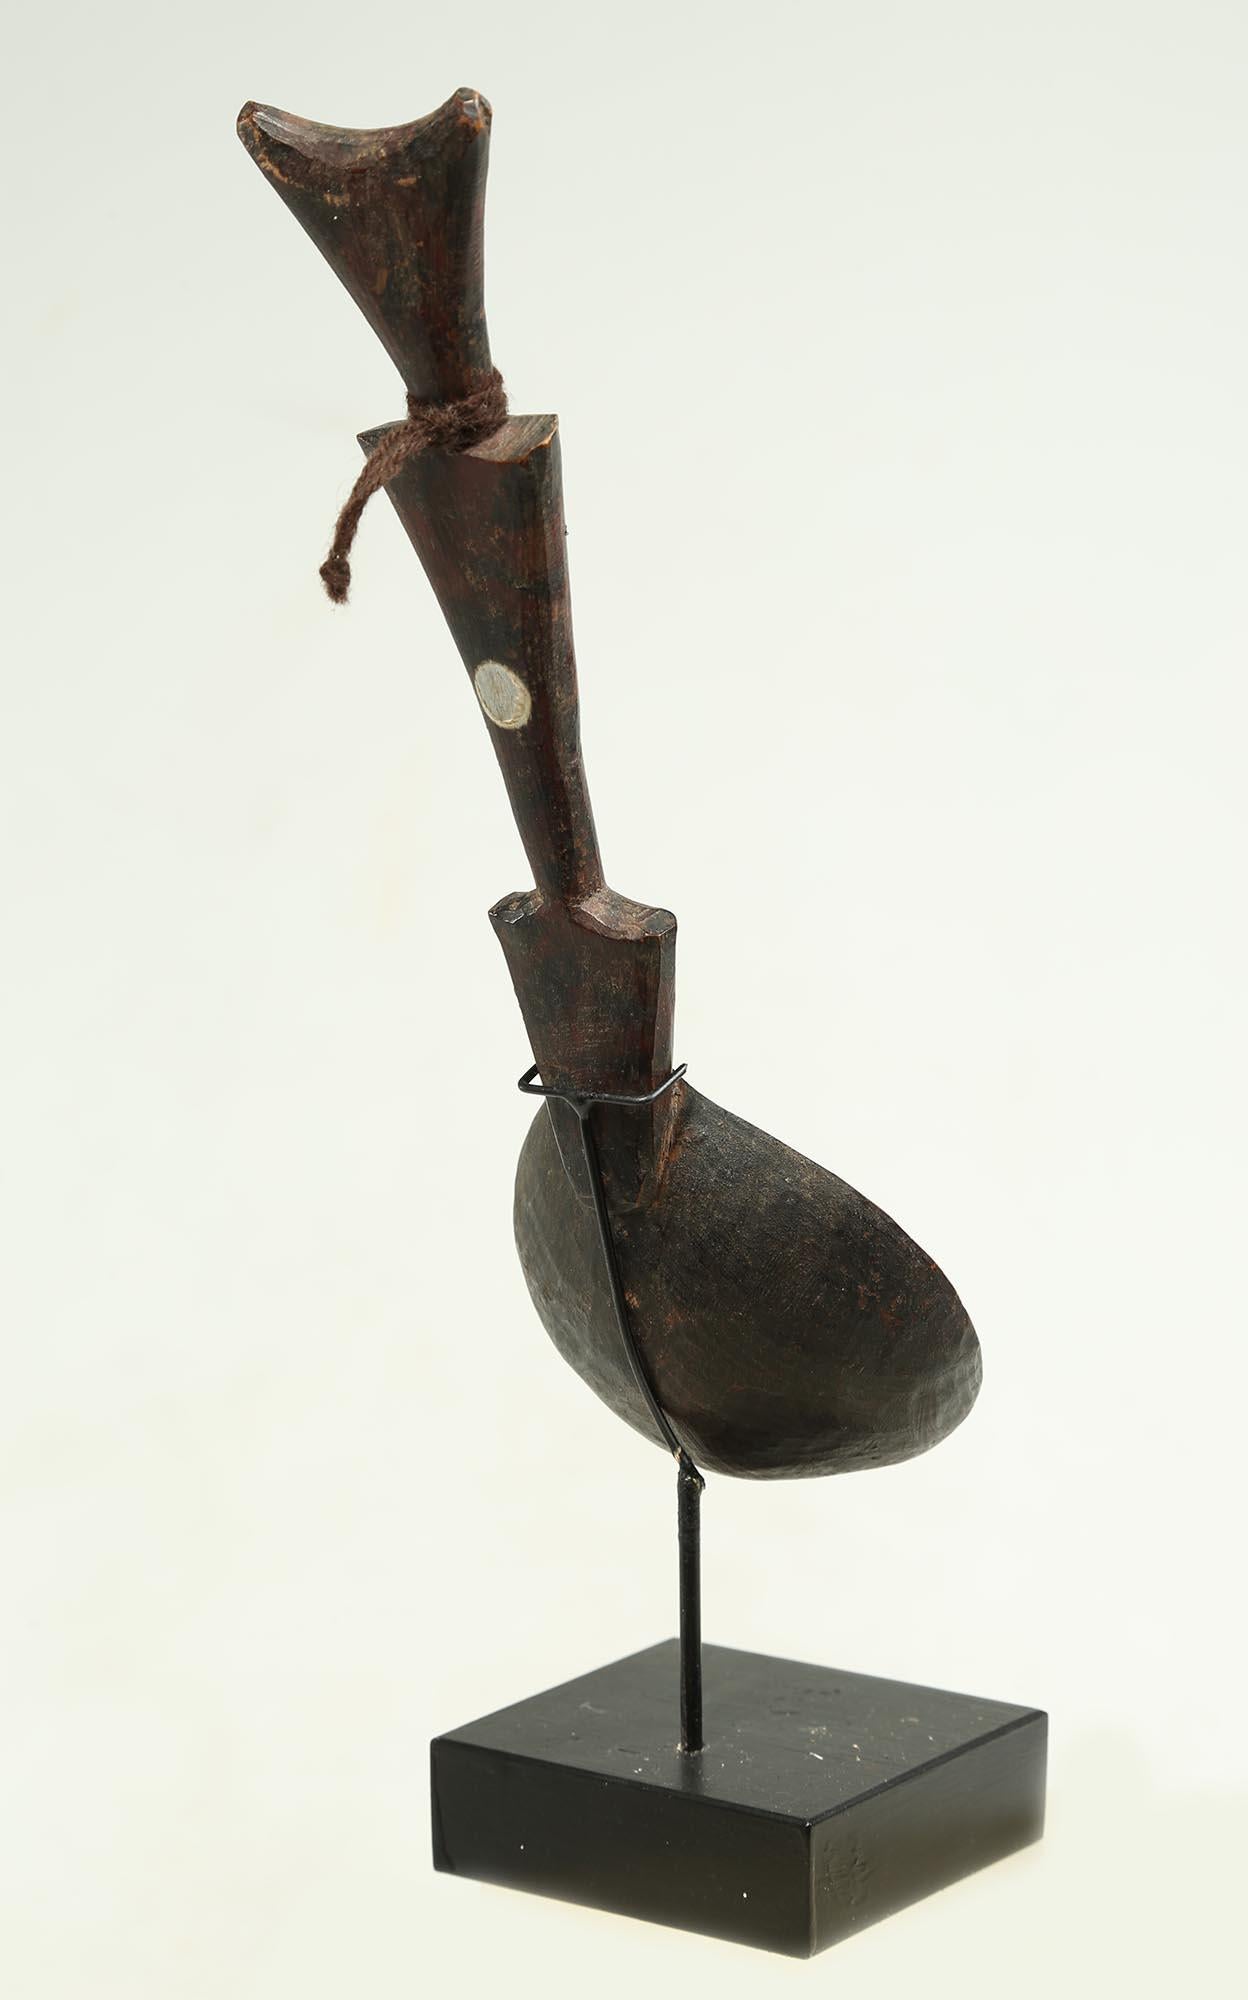 South Sudanese Elegant Dinka Spoon with Geometric Handle, South Sudan Africa Early 20th Century